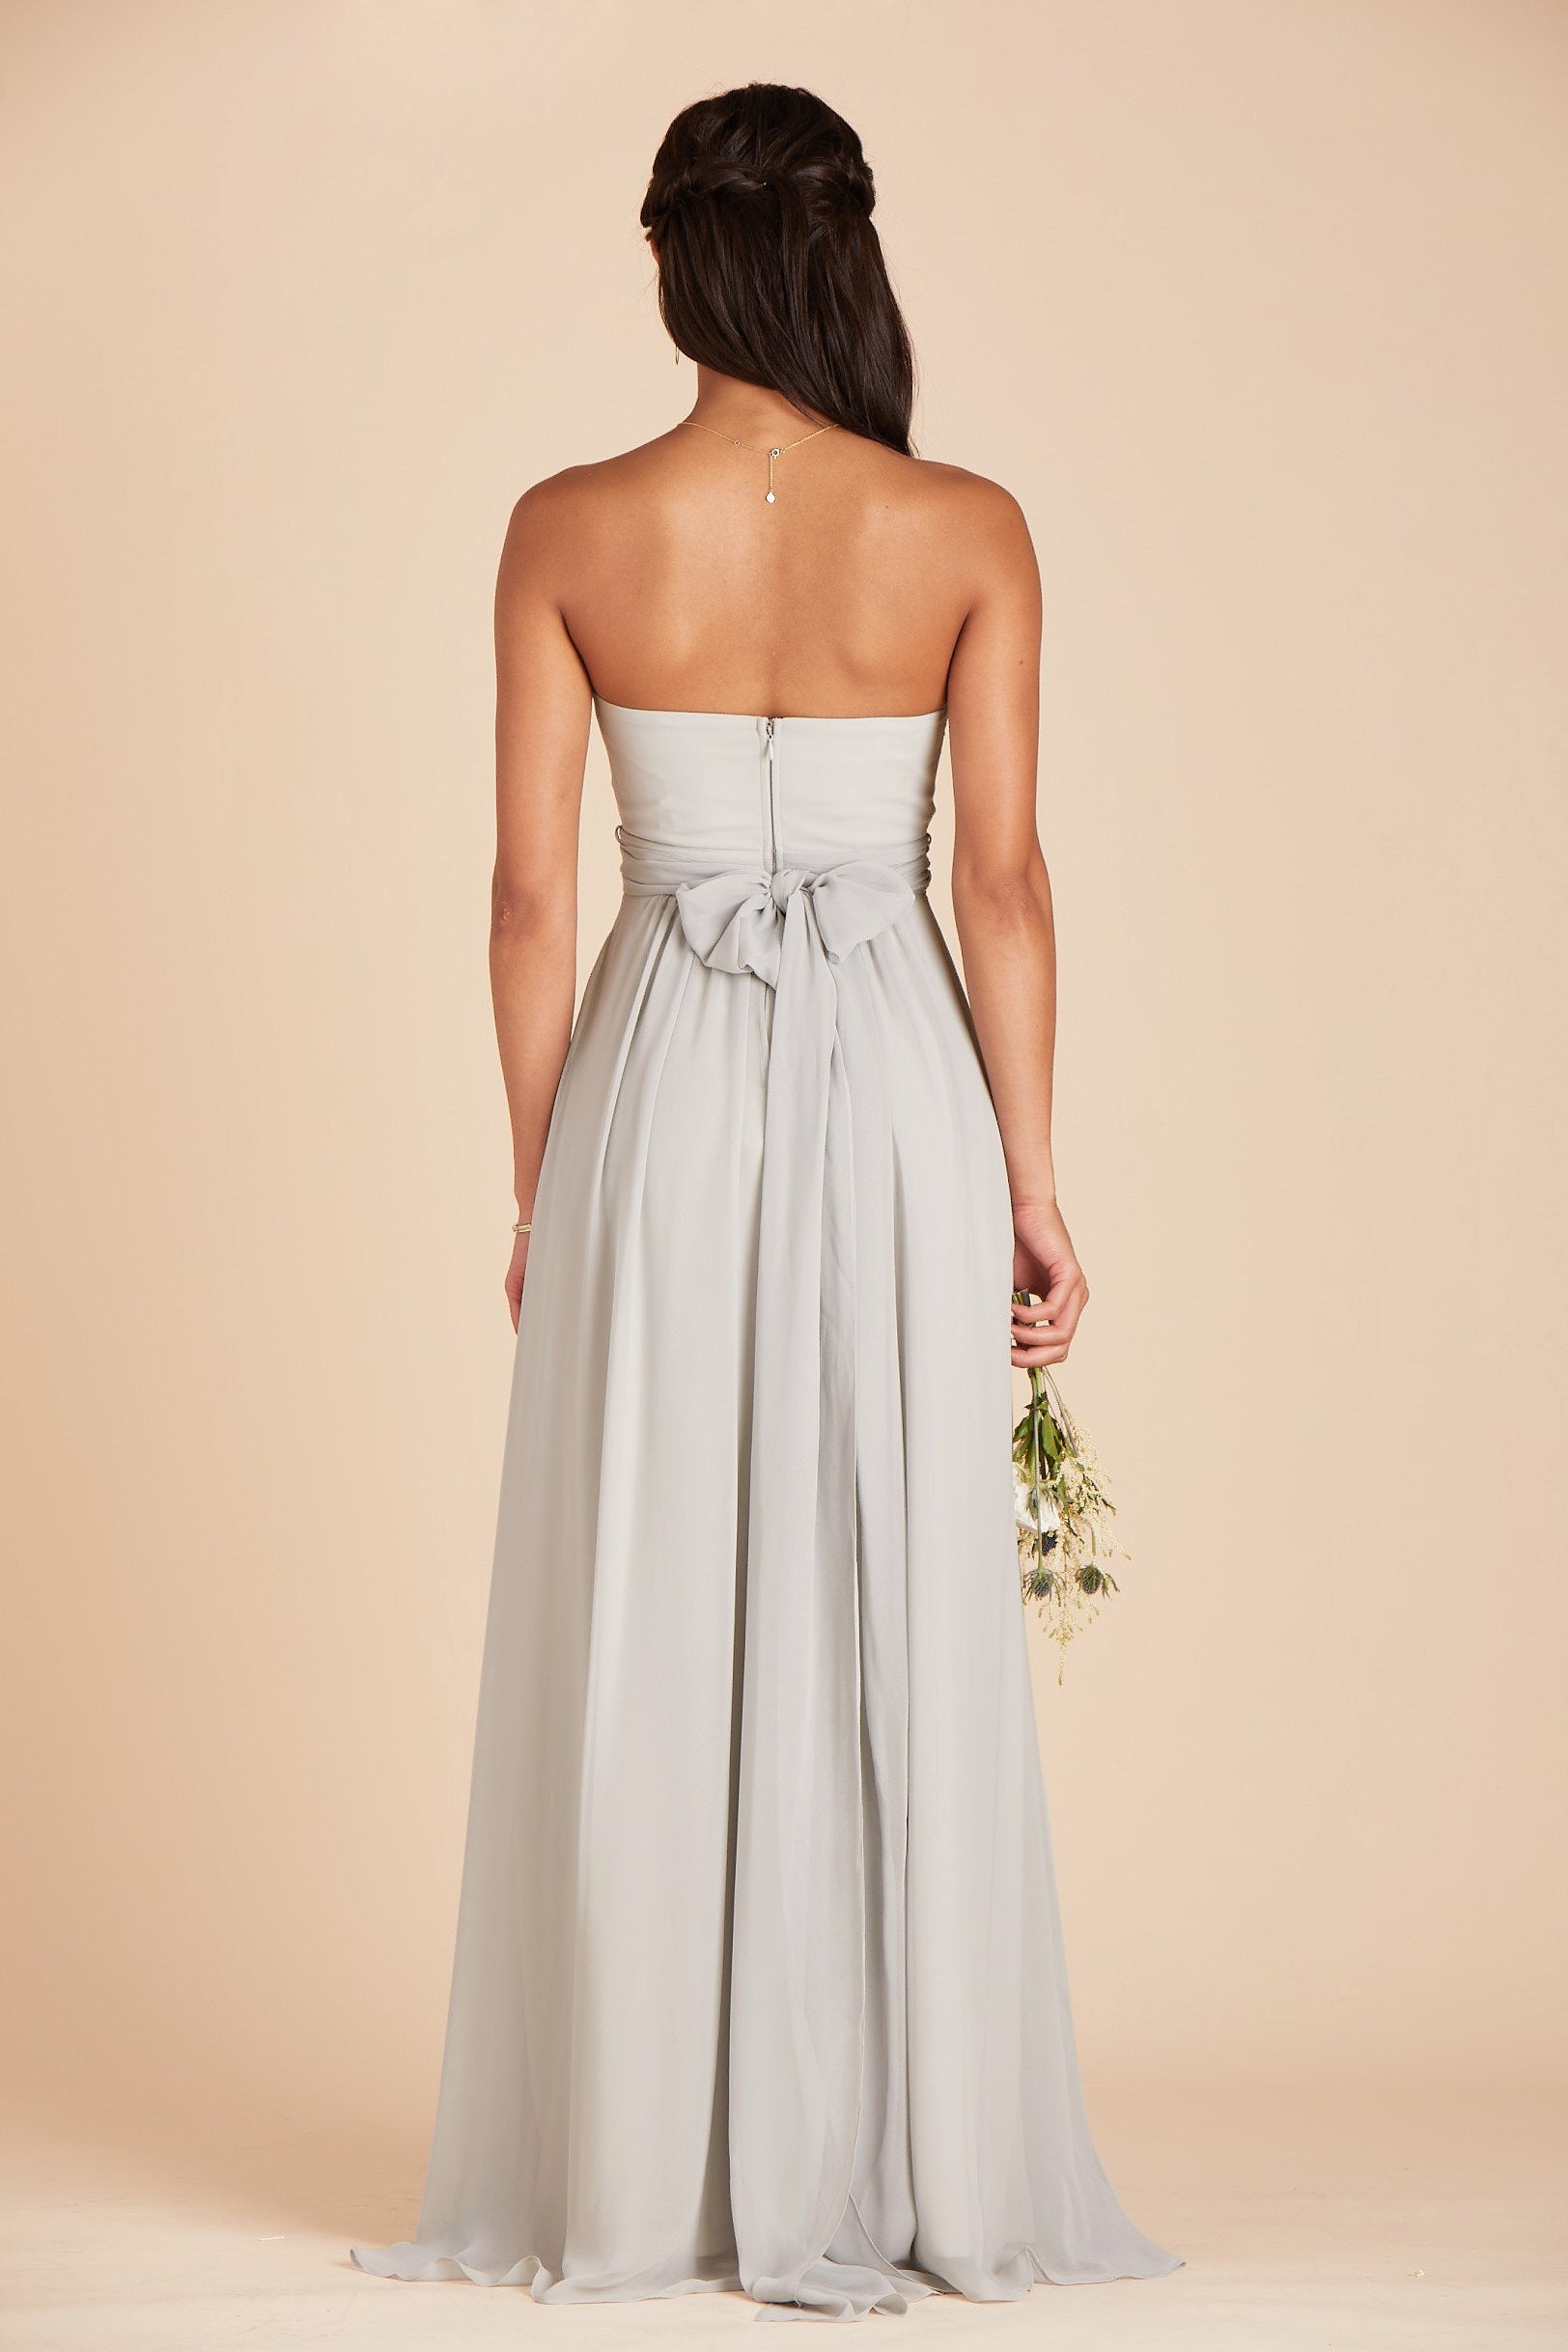 Grace convertible bridesmaid dress in dove gray chiffon by Birdy Grey, back view